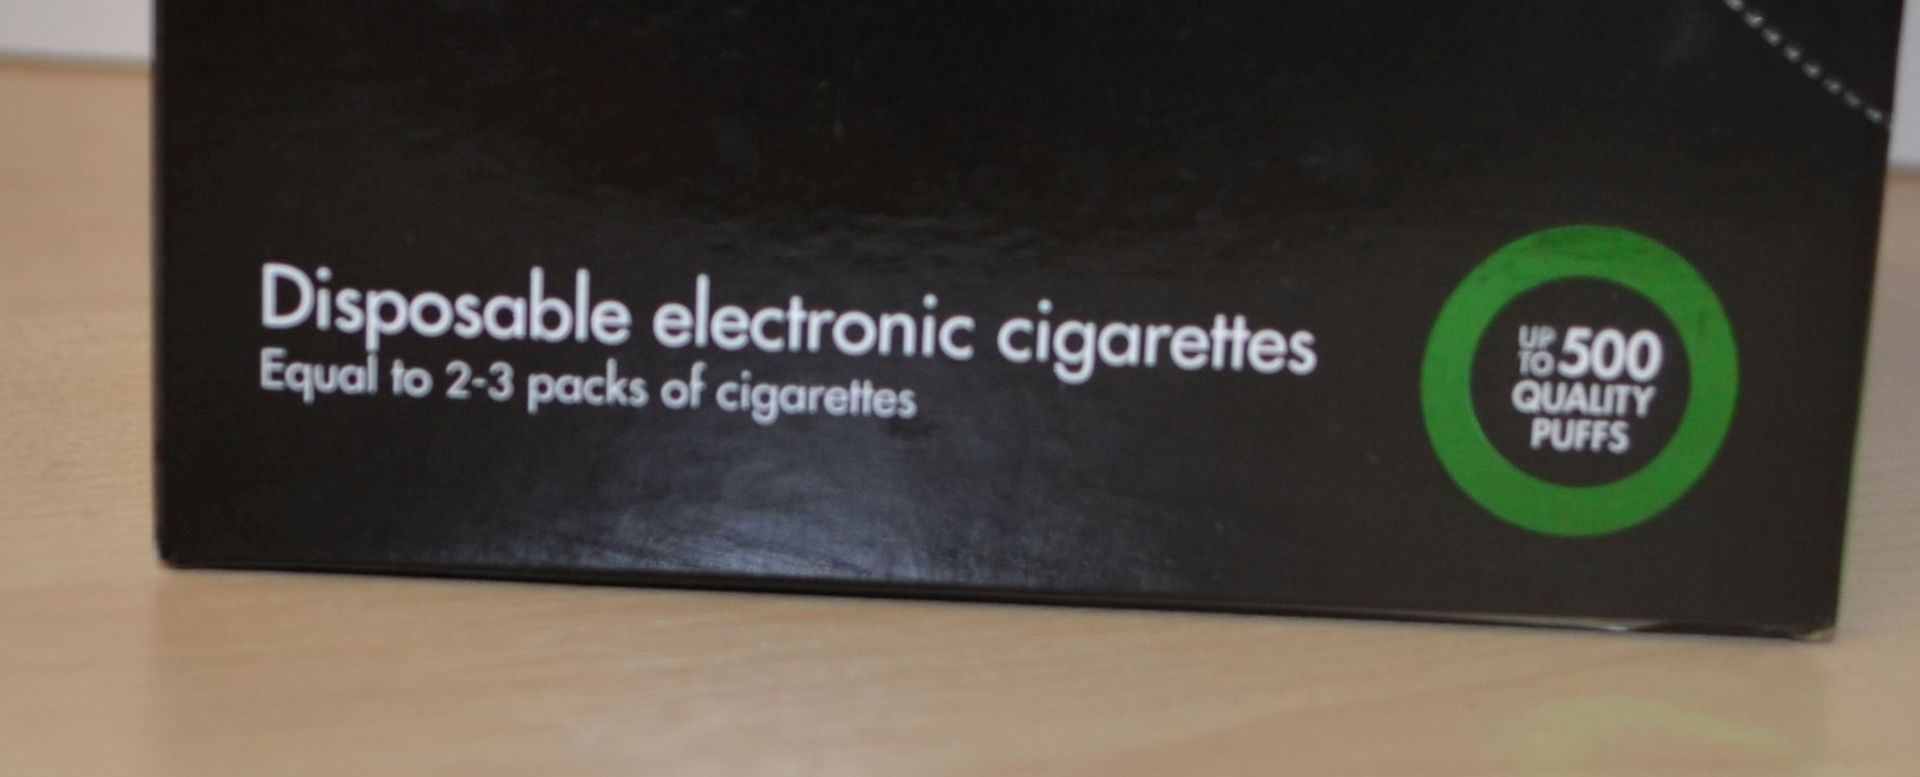 60 x Neo E-Cigarettes Cool Mint Disposable Electronic Cigarettes - New & Sealed Stock - CL185 - Ref: - Image 3 of 8